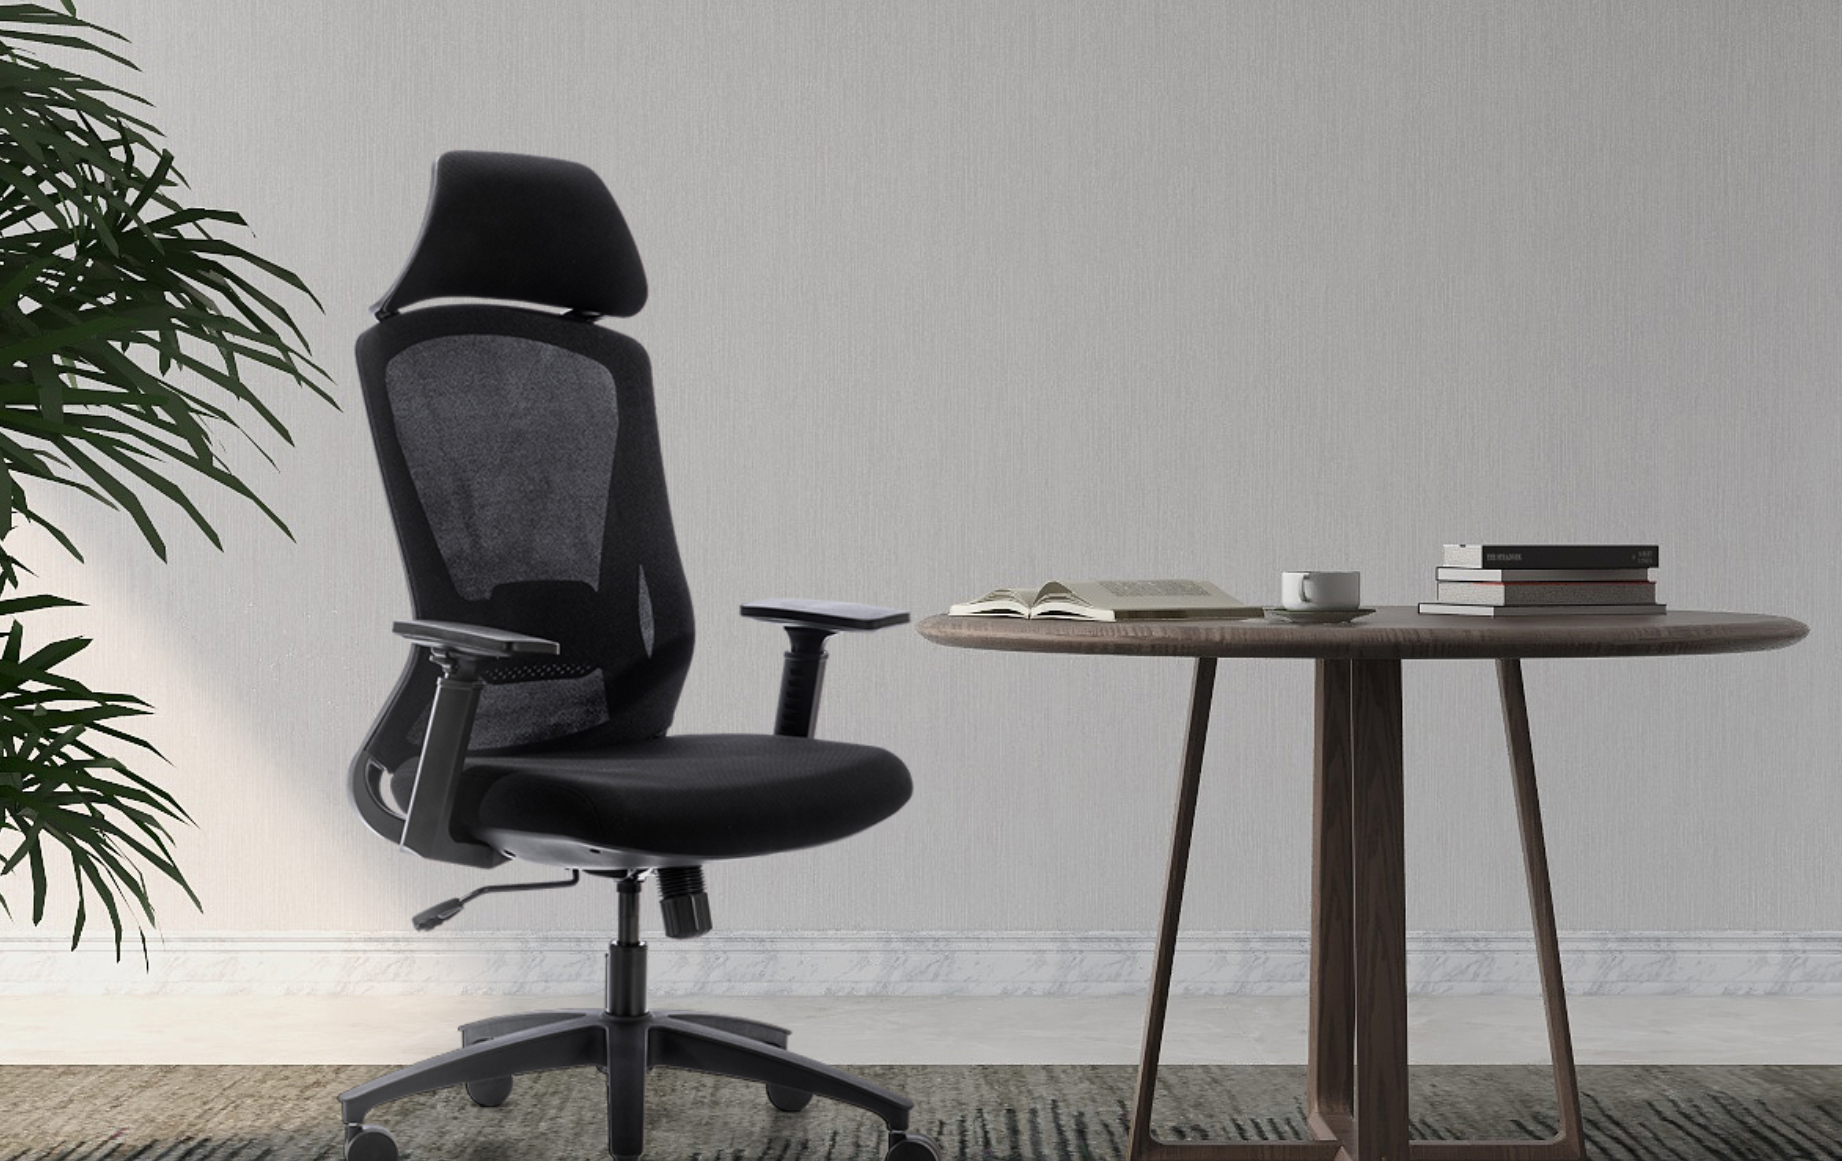 How to set up an office chair – Ensure maximum comfort in your seat